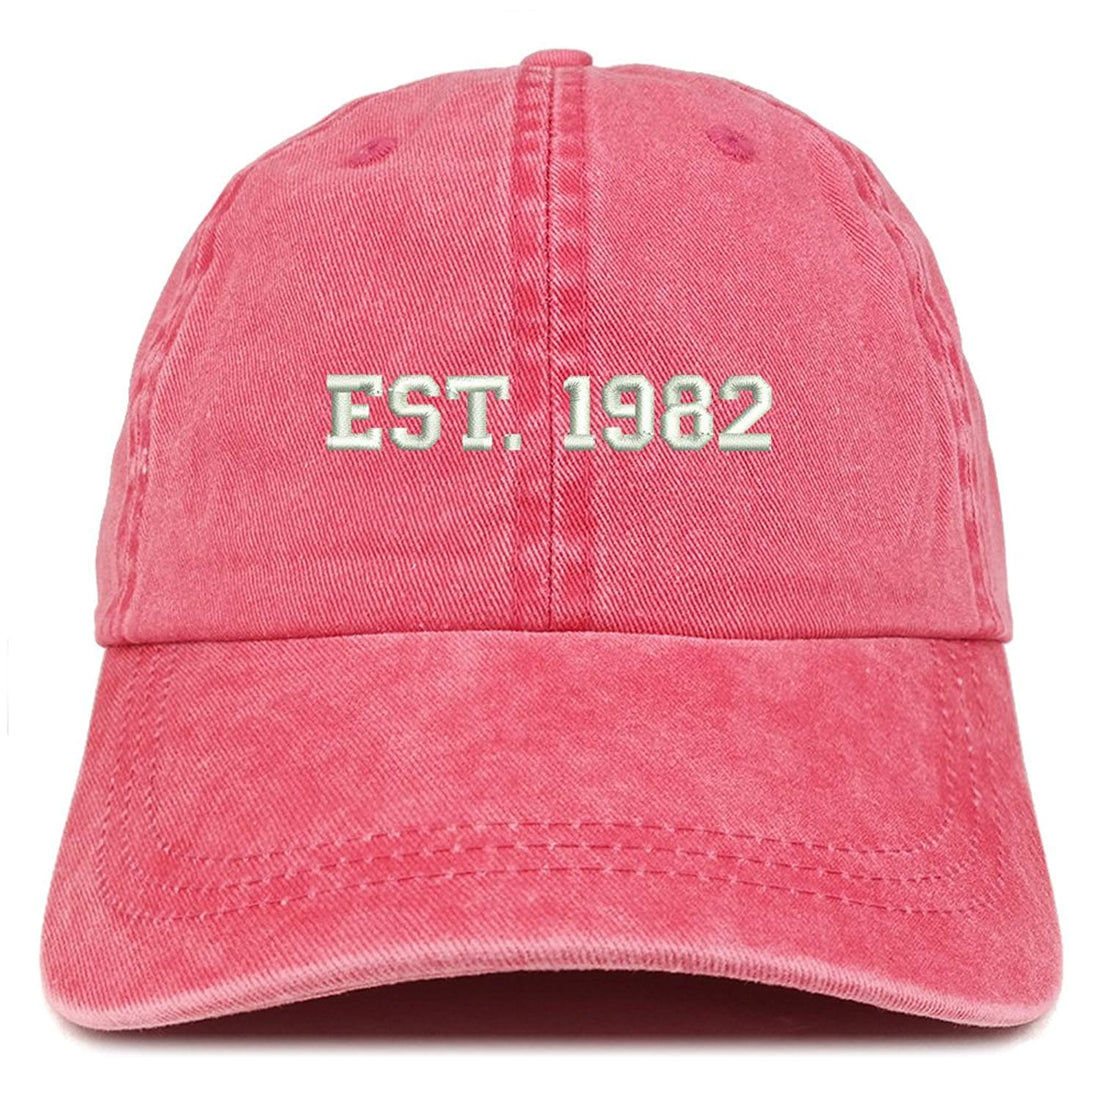 Trendy Apparel Shop EST 1982 Embroidered - 37th Birthday Gift Pigment Dyed Washed Cap